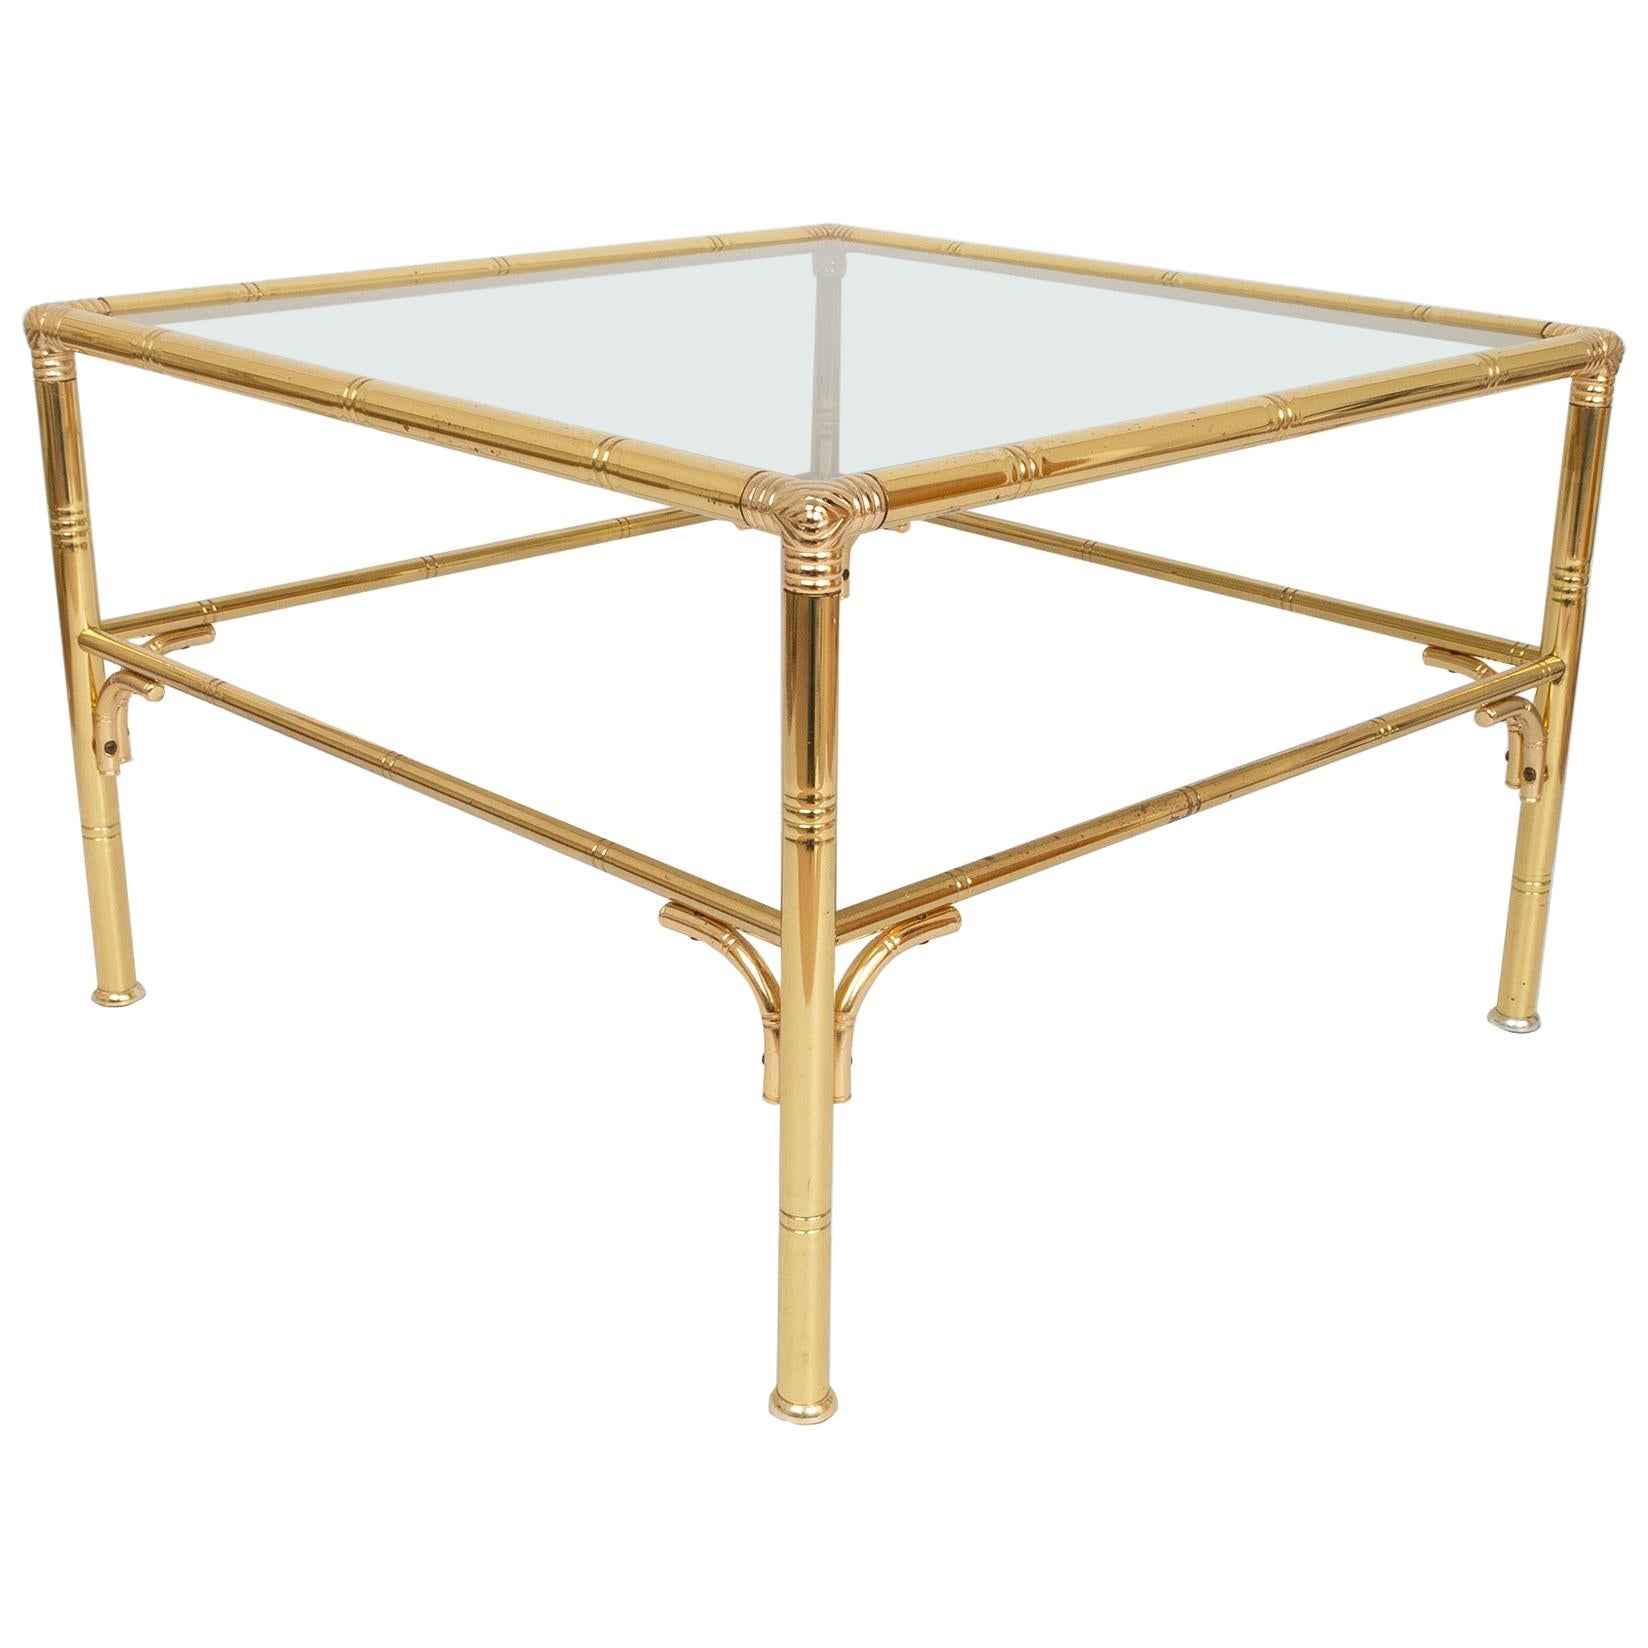 Midcentury Faux Bamboo Gold Brass & Glass Square Coffee Table, Italy, circa 1970